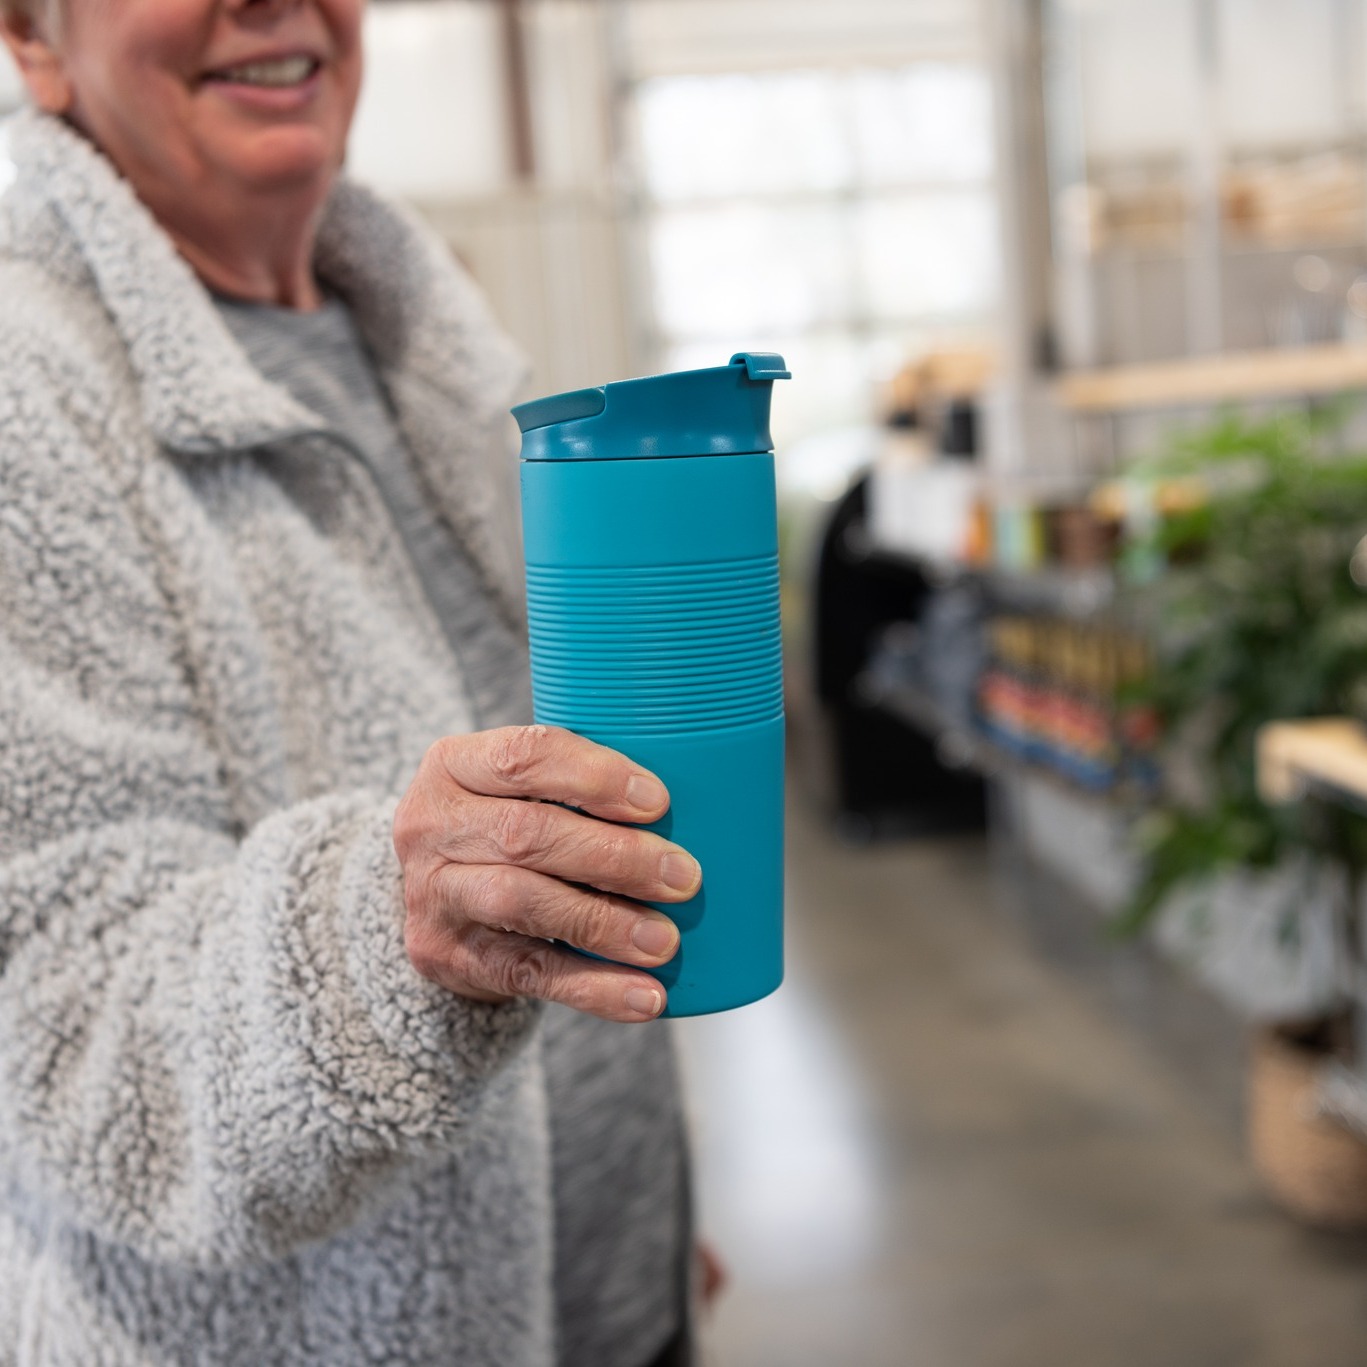 Bring your own cup for special priced filter coffee! For those wanting to take their coffee to go, we recommend bringing your own reusable cup. We also sell them at the @littleriverroasting Cafe in various colors and sizes!

#coffeelovers #coffeetime #spartanburgcoffee #upstatecoffee #icedcoffee